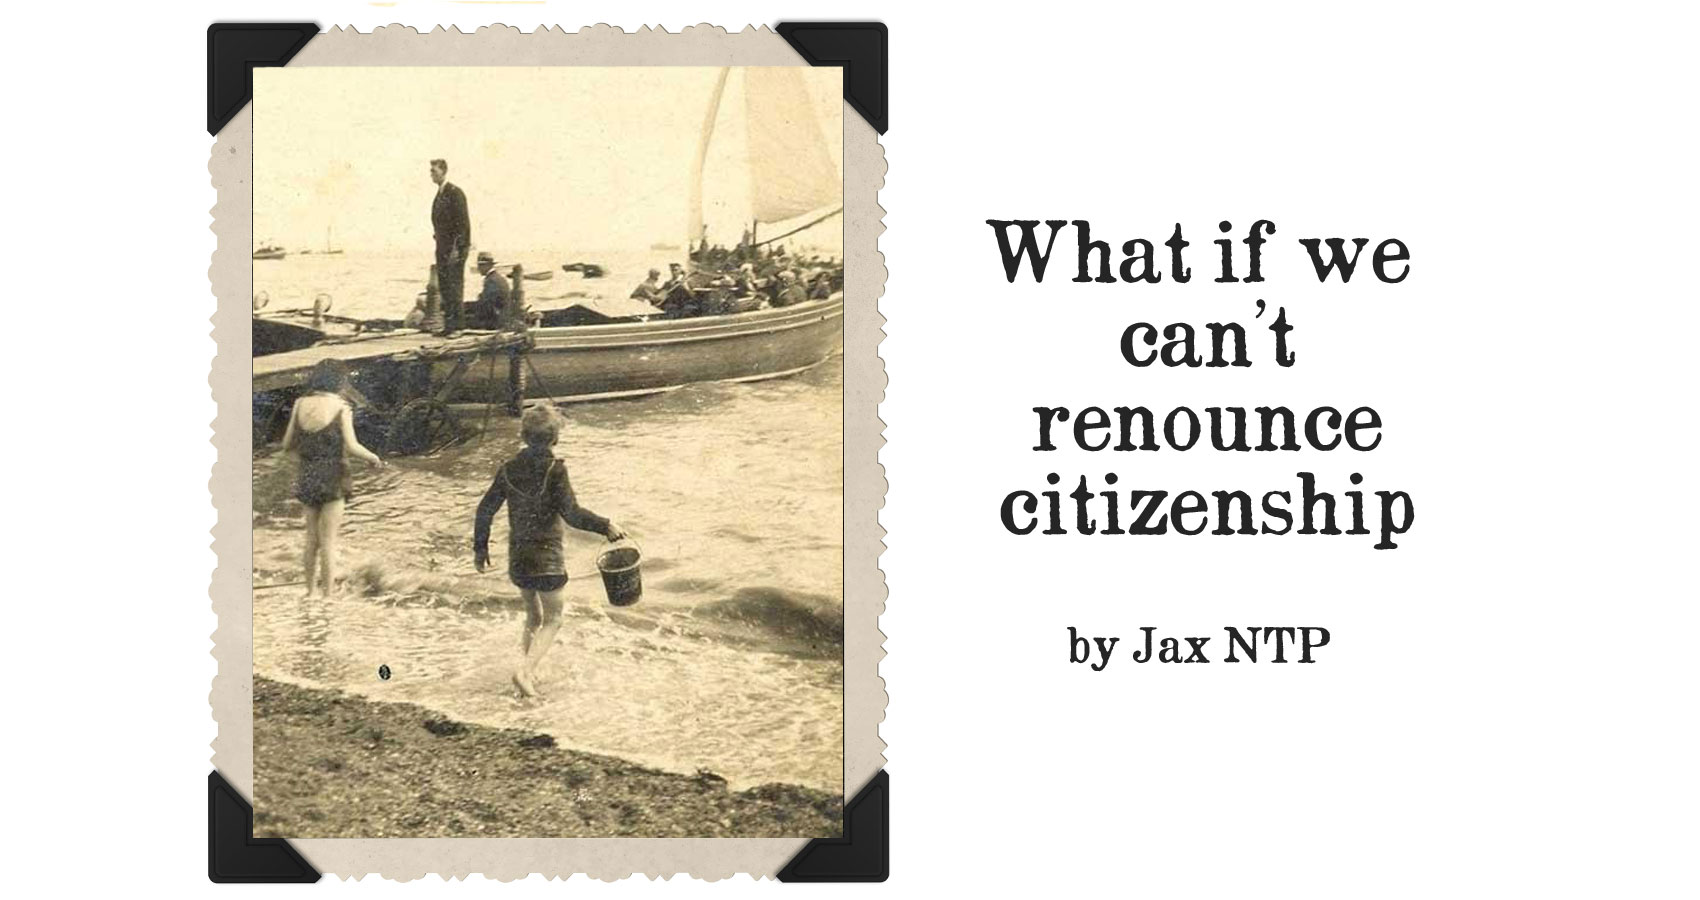 What if we can’t renounce citizenship by Jax NTP at Spillwords.com